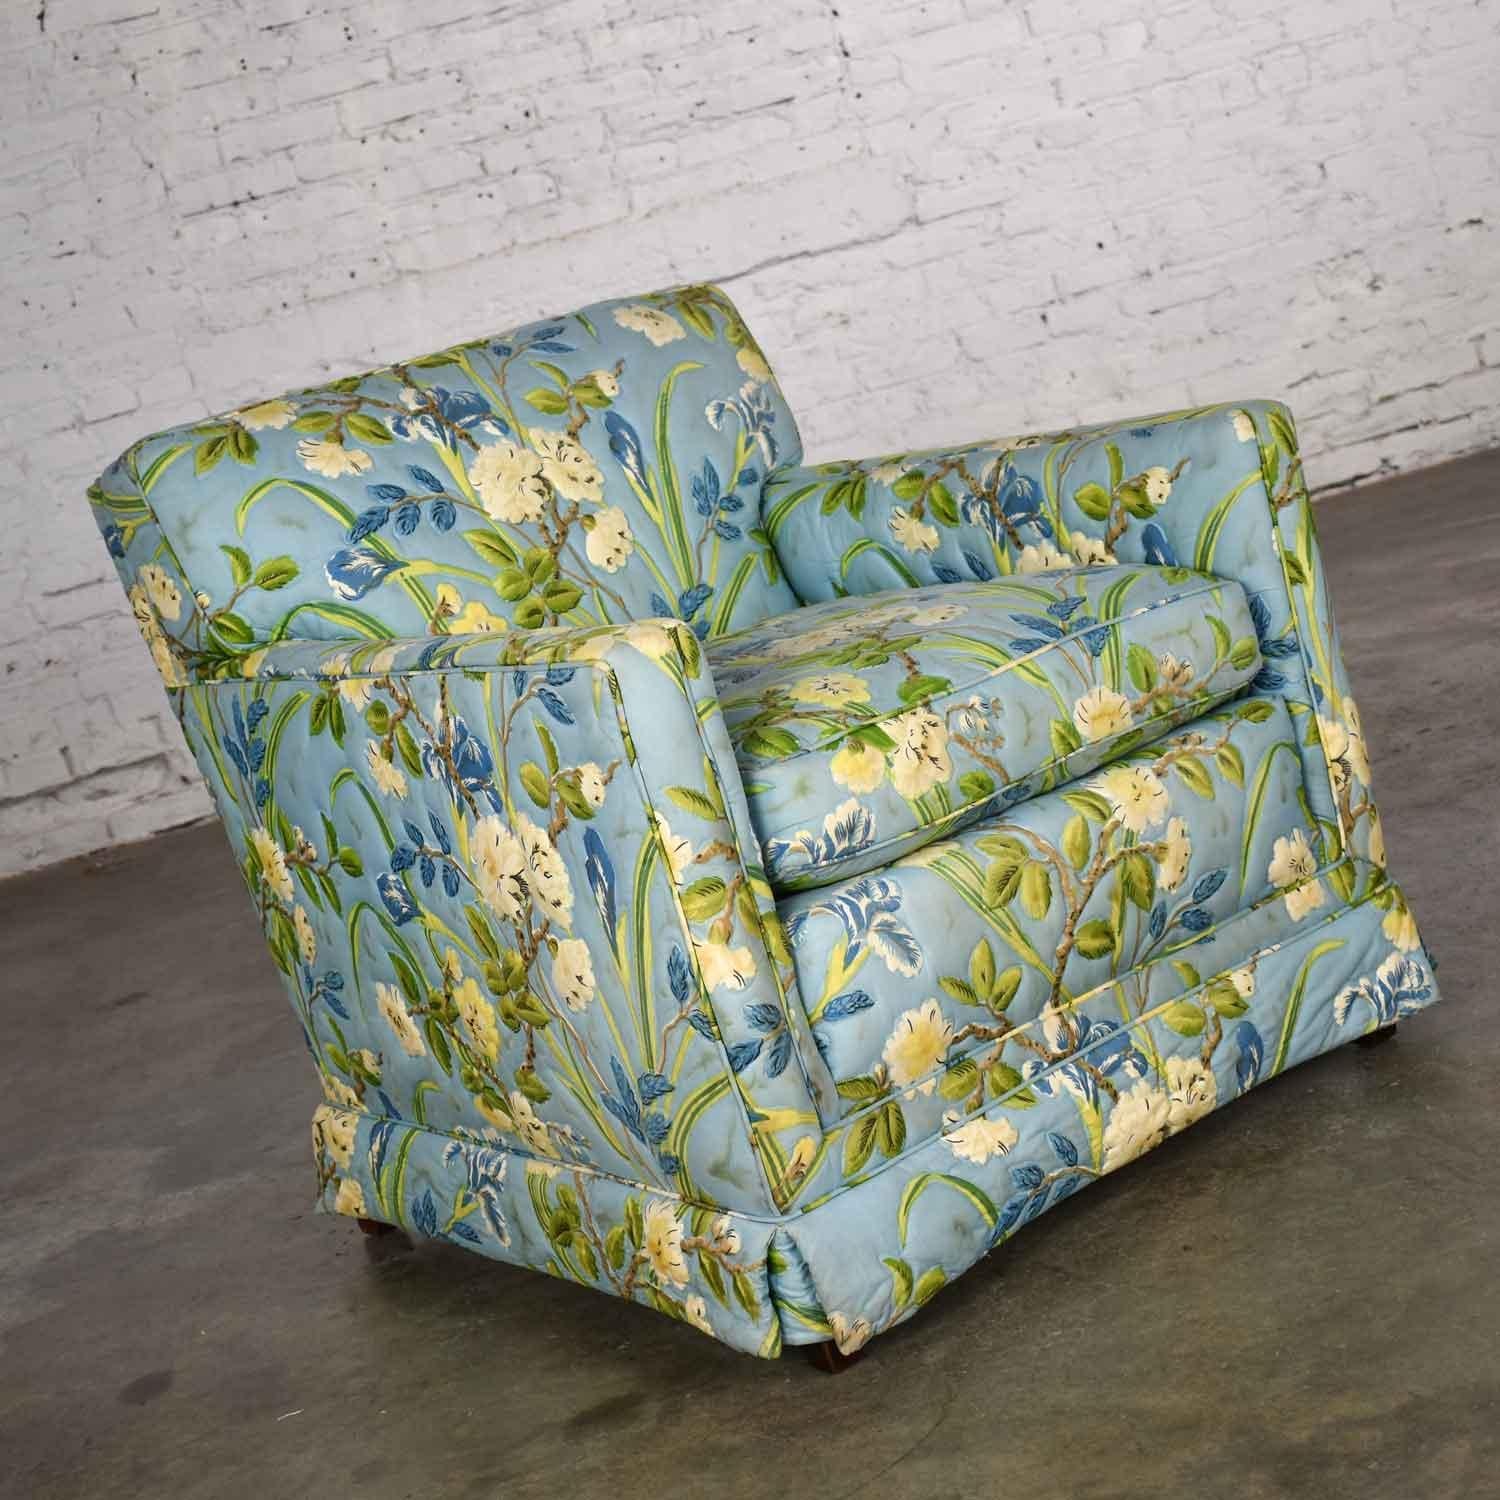 Gorgeous Hollywood Regency upholstered club chair with original quilted blue chintz cabbage rose floral print fabric by J and S Furniture Mfg. Co. (Although its shape if you don’t at the fabric is very Art Deco or Mid Century Modern like Jean